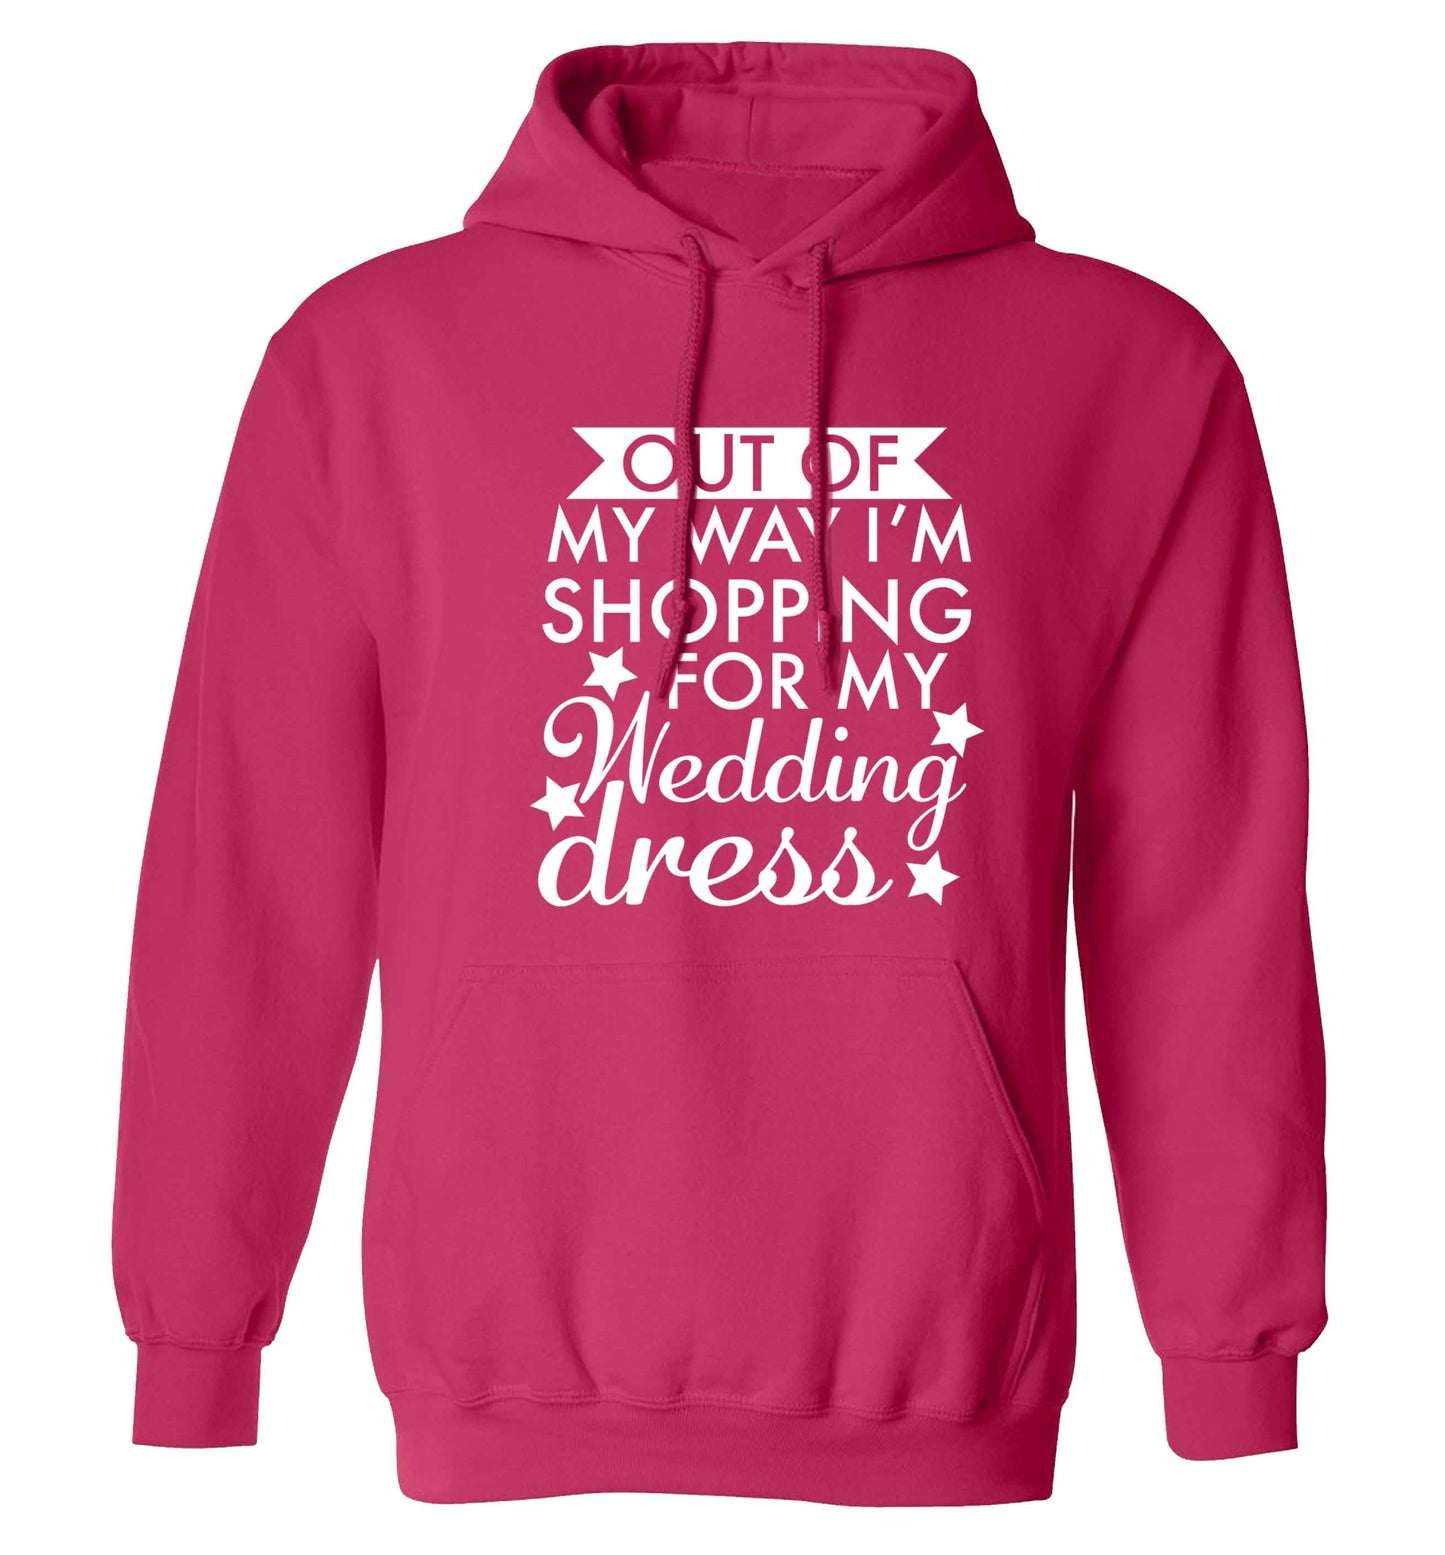 Out of my way I'm shopping for my wedding dress adults unisex pink hoodie 2XL